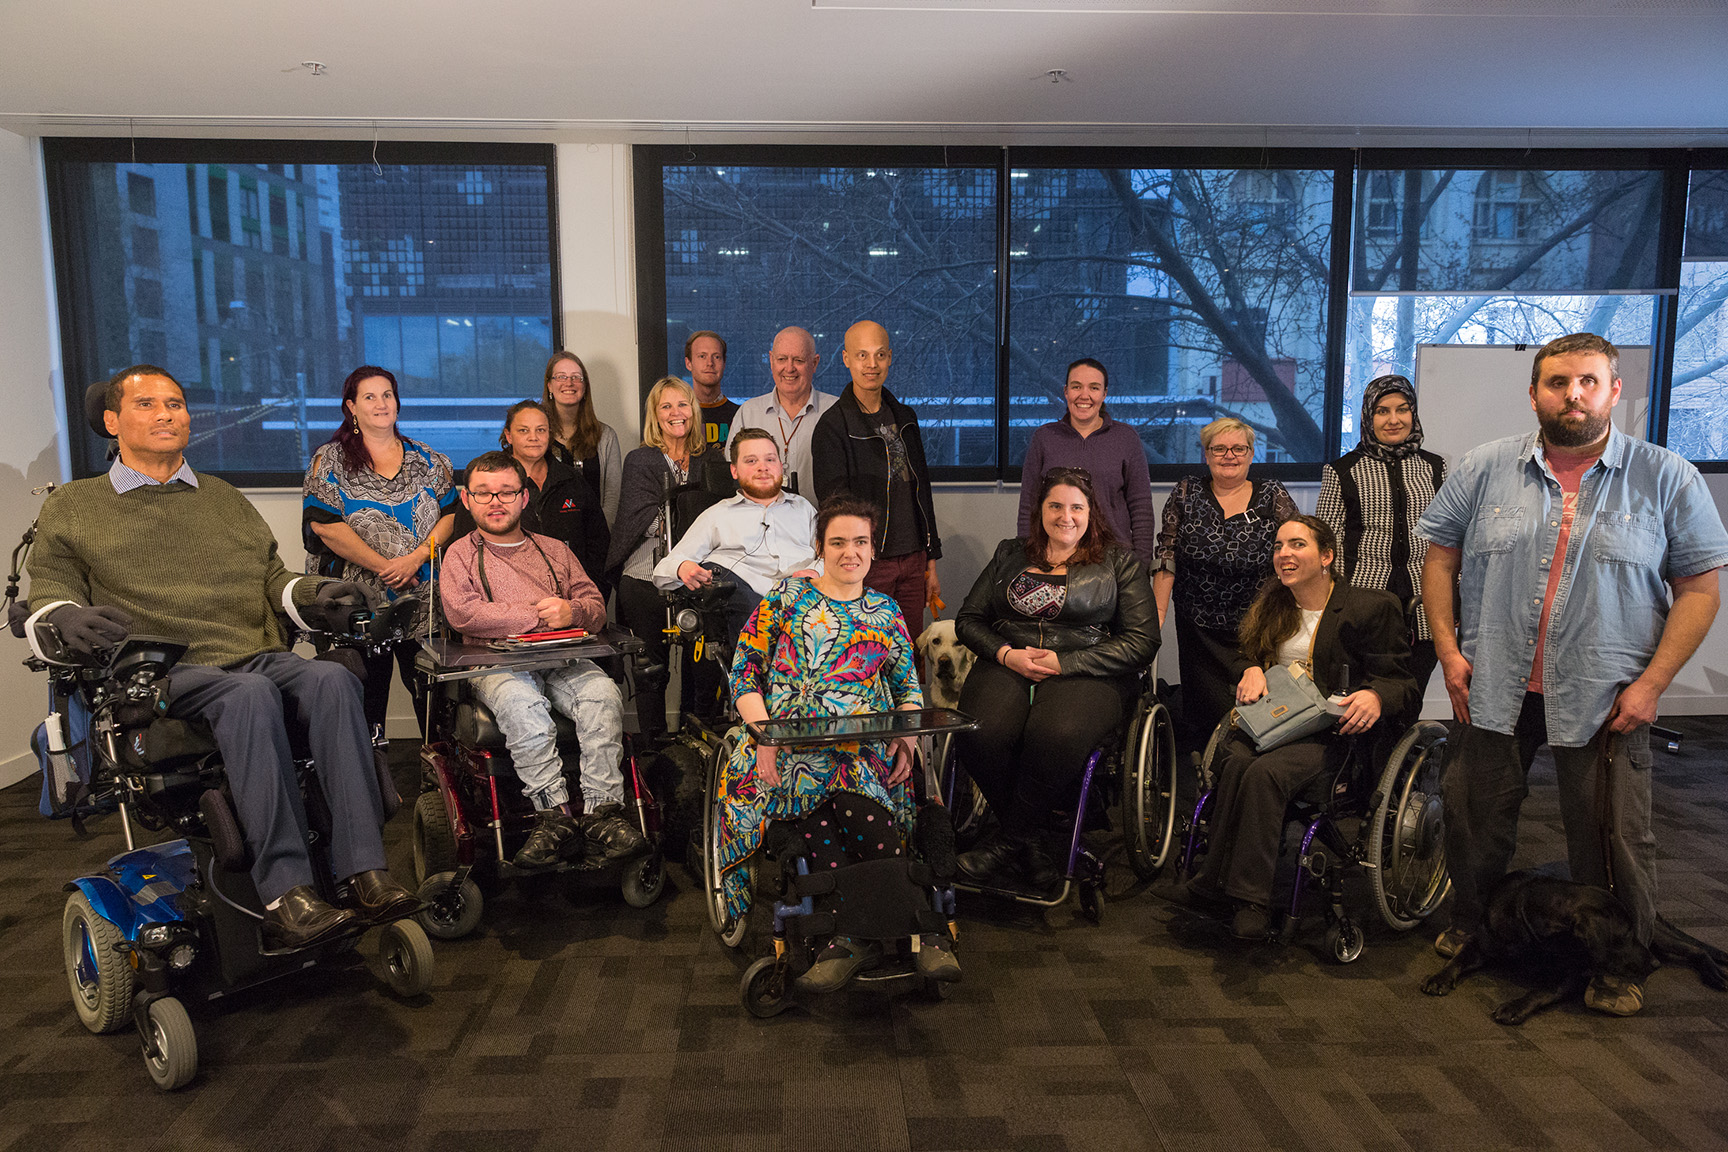 photo of a group of 17 people (and 2 guide dogs) facing the camera, in a conference room. They are in front a a wall of windows - semi transparent blinds are down but a tree and buildings are visible in the background. There is dark grey carpet in the foreground. Our champions team's expressions appear excited and proud.